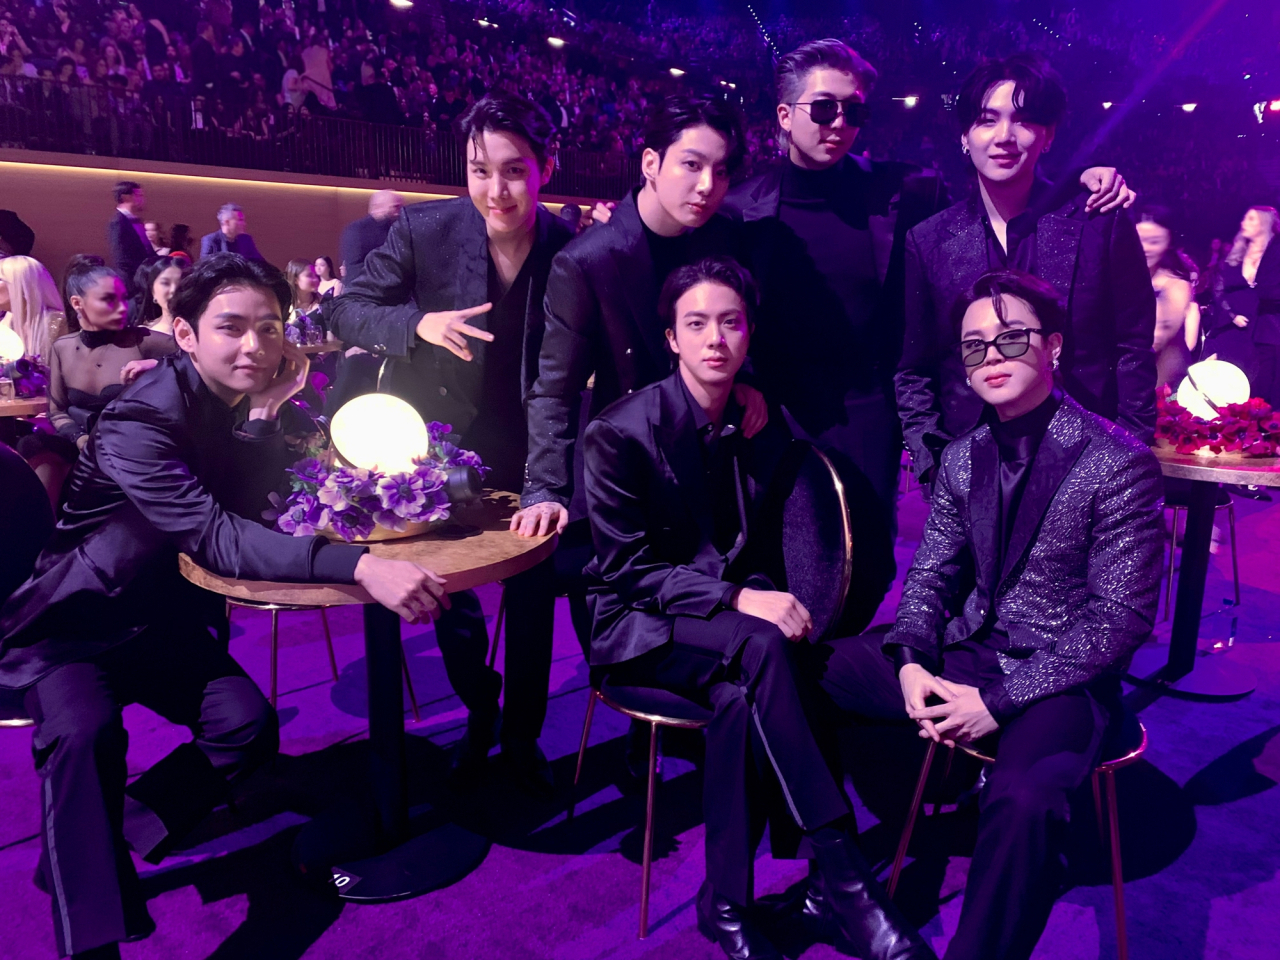 K-pop boy group BTS poses for photos during the 64th Annual Grammy Awards ceremony at the MGM Grand Garden Arena in Las Vegas on April 3, 2022. (Big Hit Music)